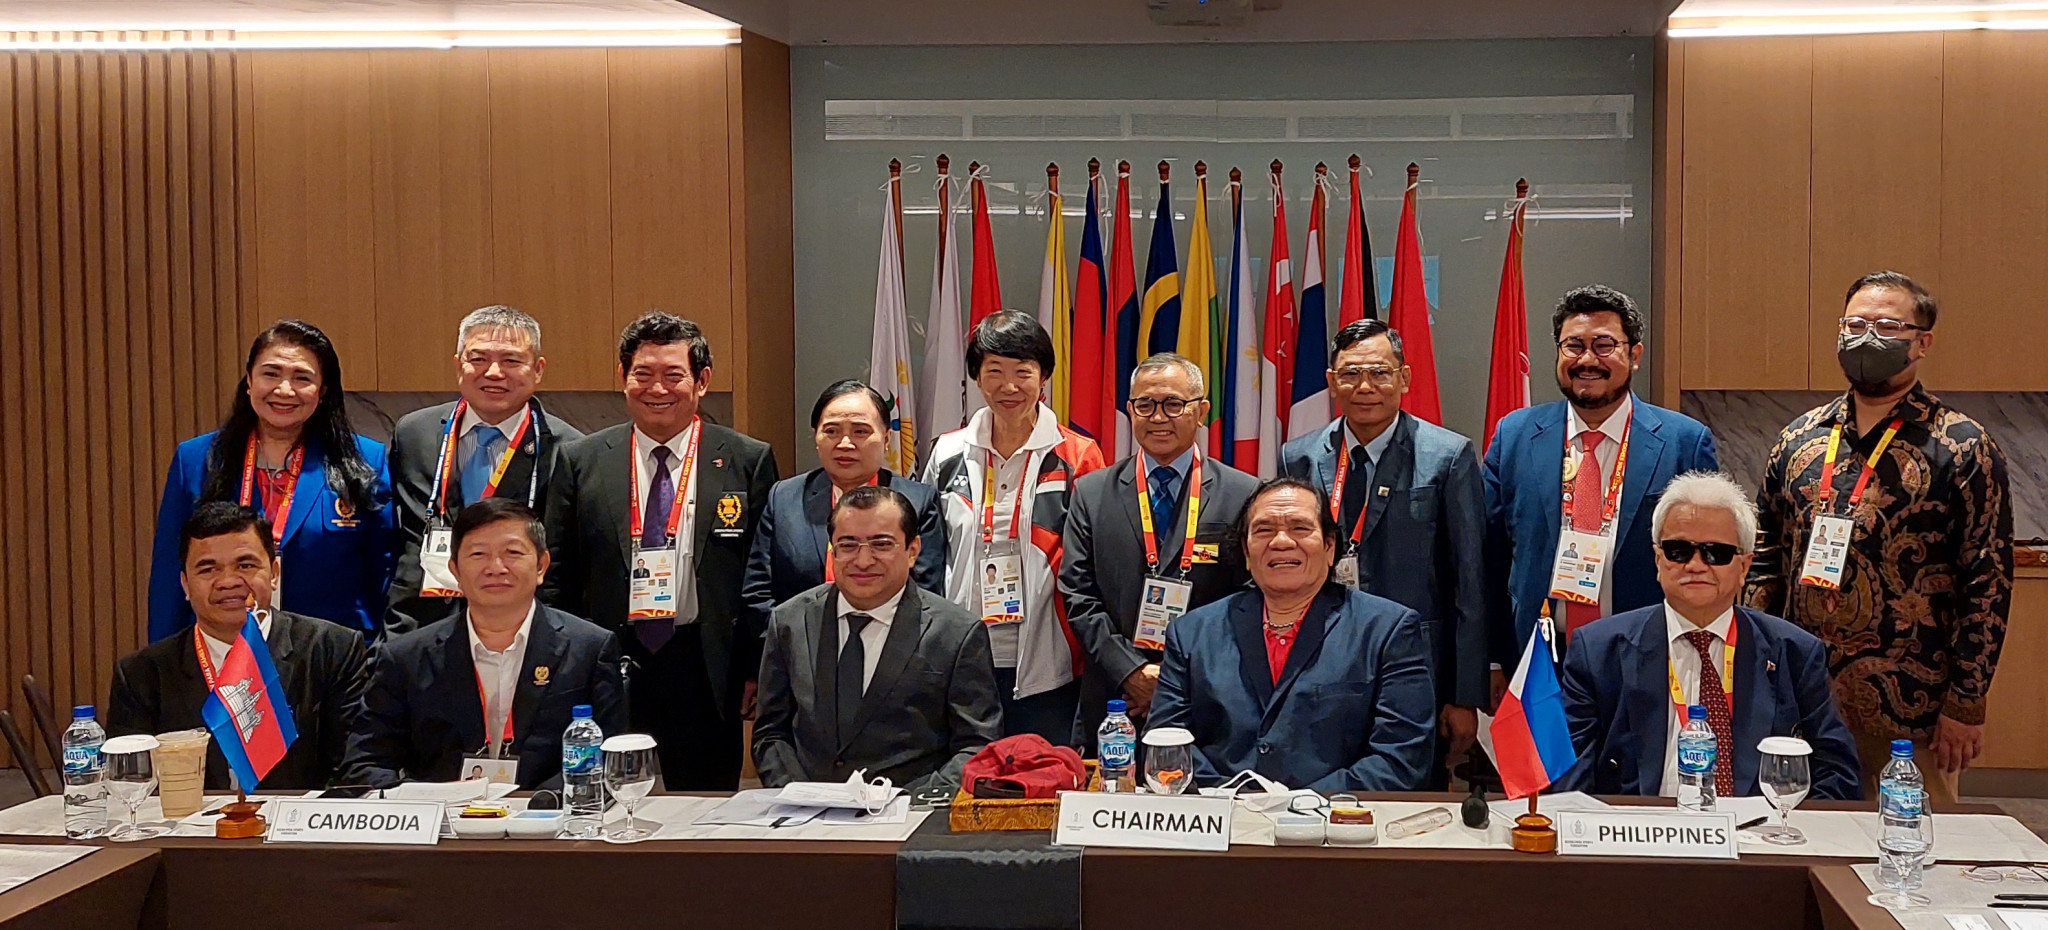 Osoth Bhavilai, back row third from right, has been re-elected as the APFS Executive Committee President ©ASEAN